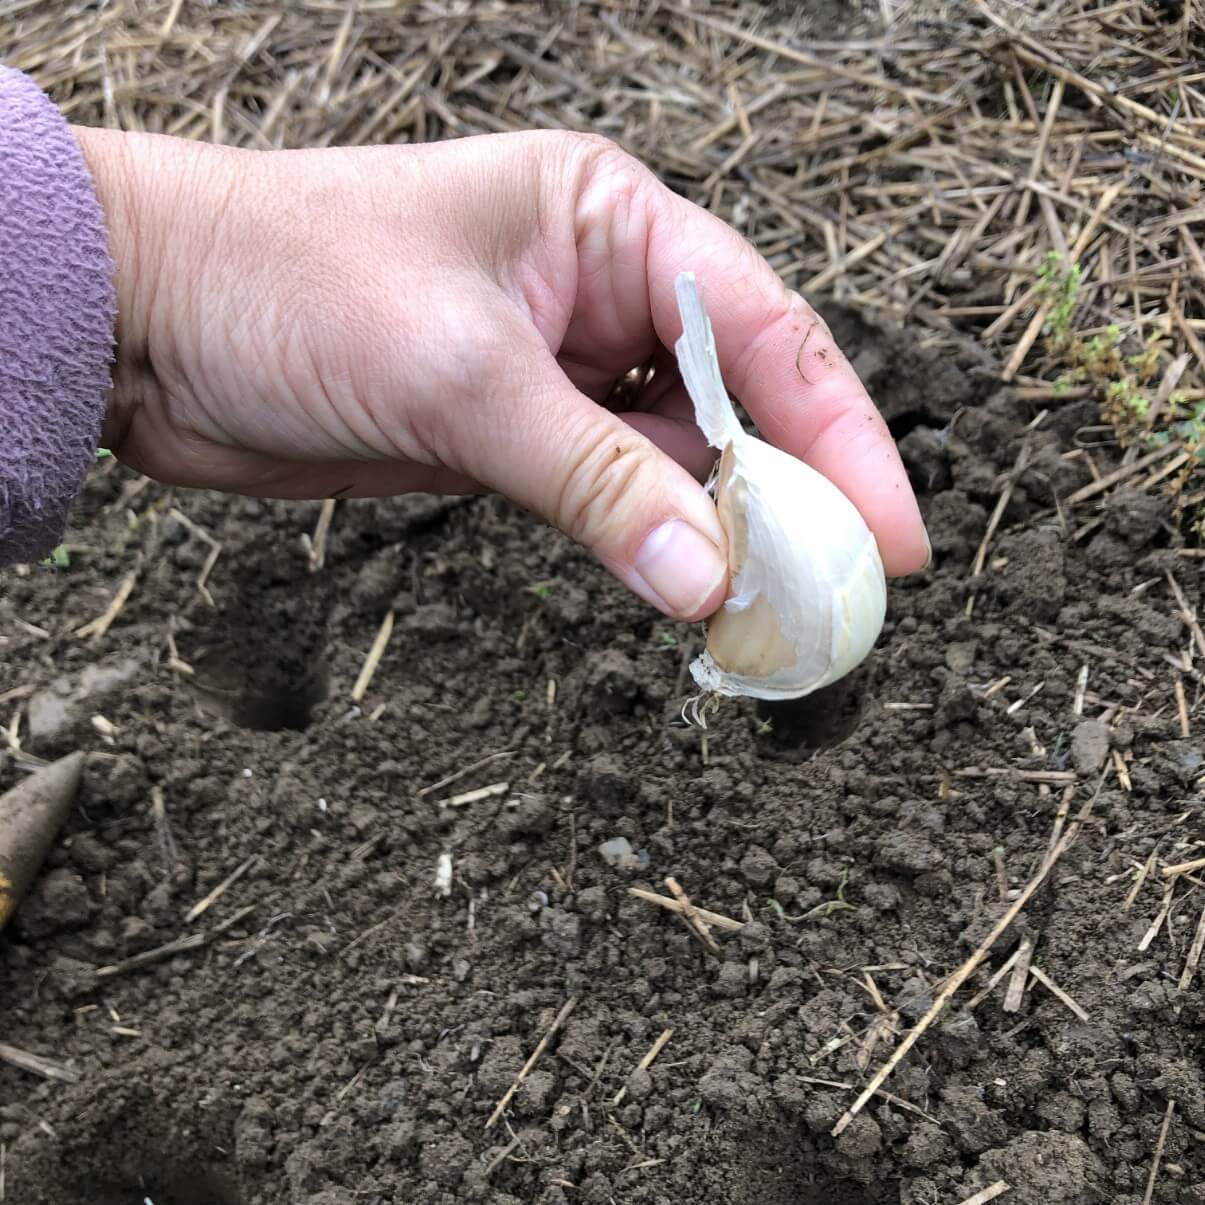 Single clove of garlic held upright for planting showing proper direction